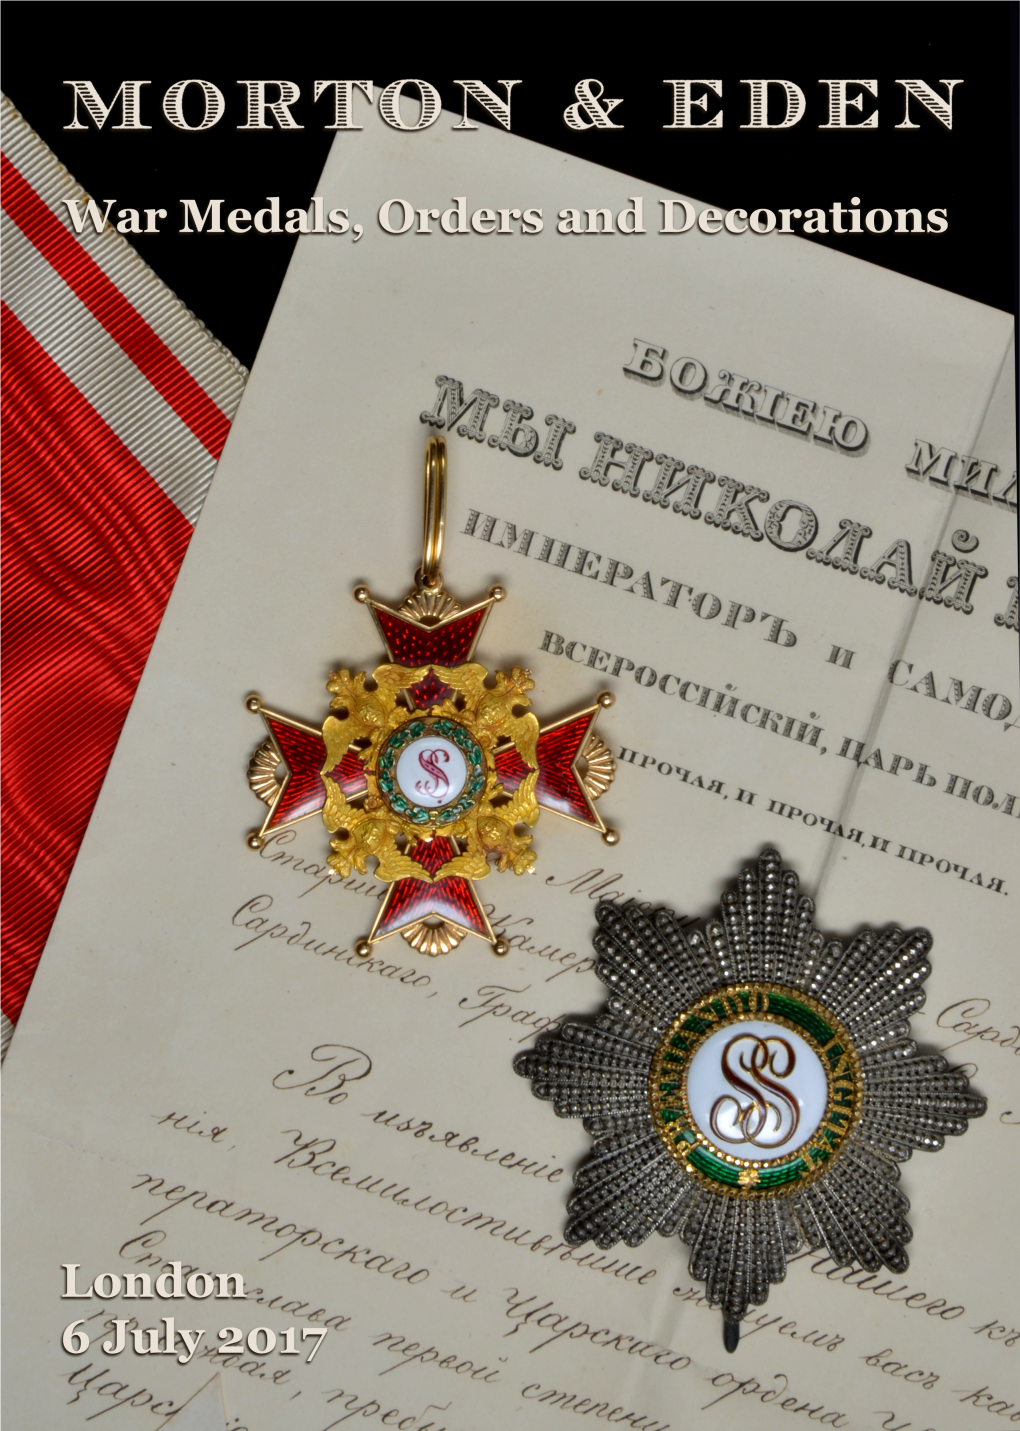 War Medals, Orders and Decorations